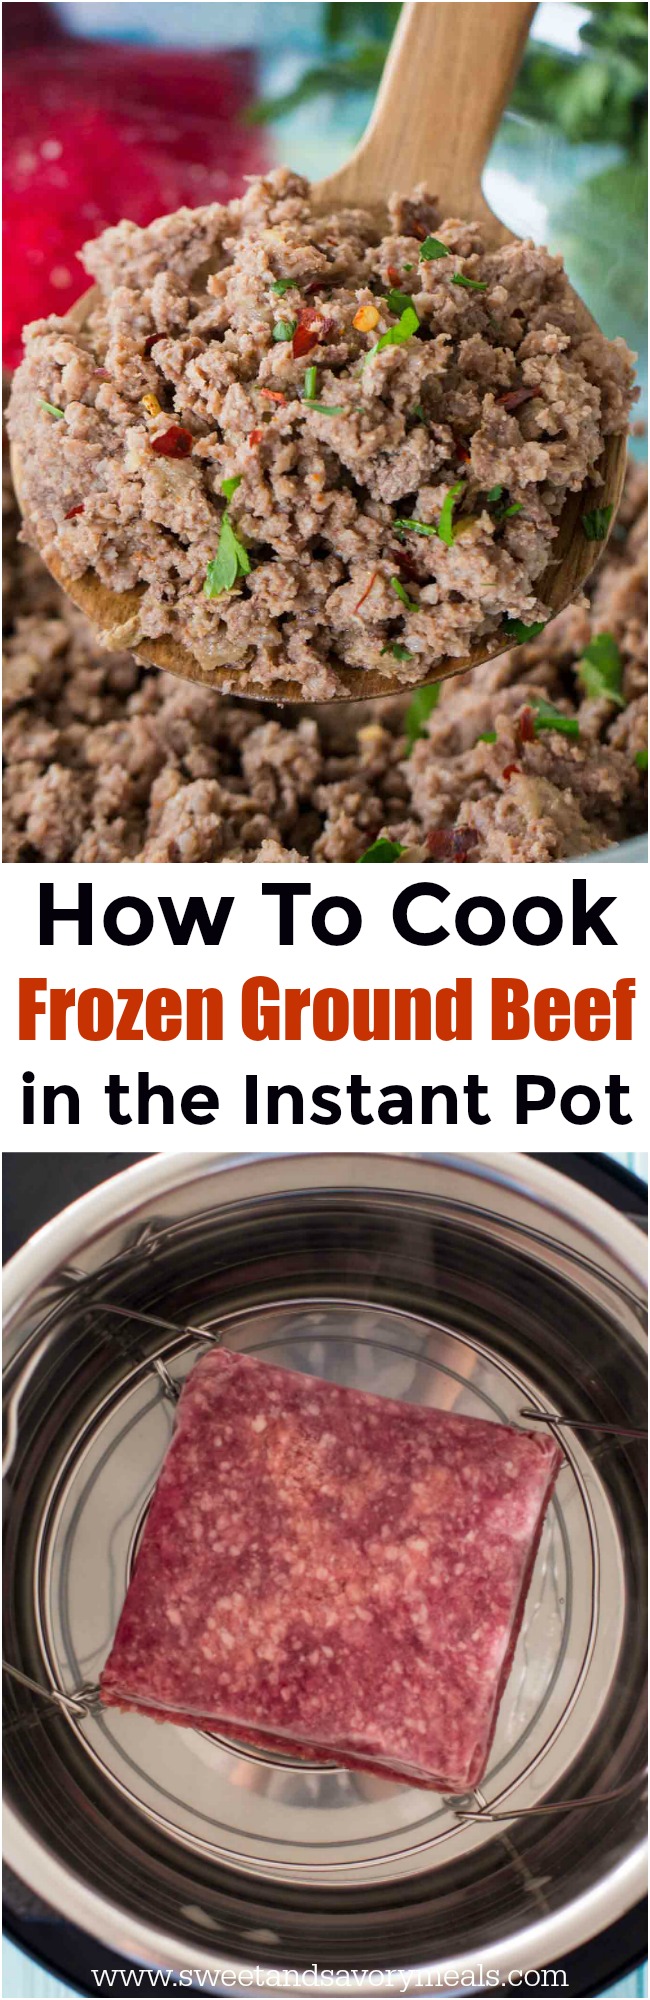 How To Cook Frozen Ground Beef In The Instant Pot - Sweet and Savory Meals